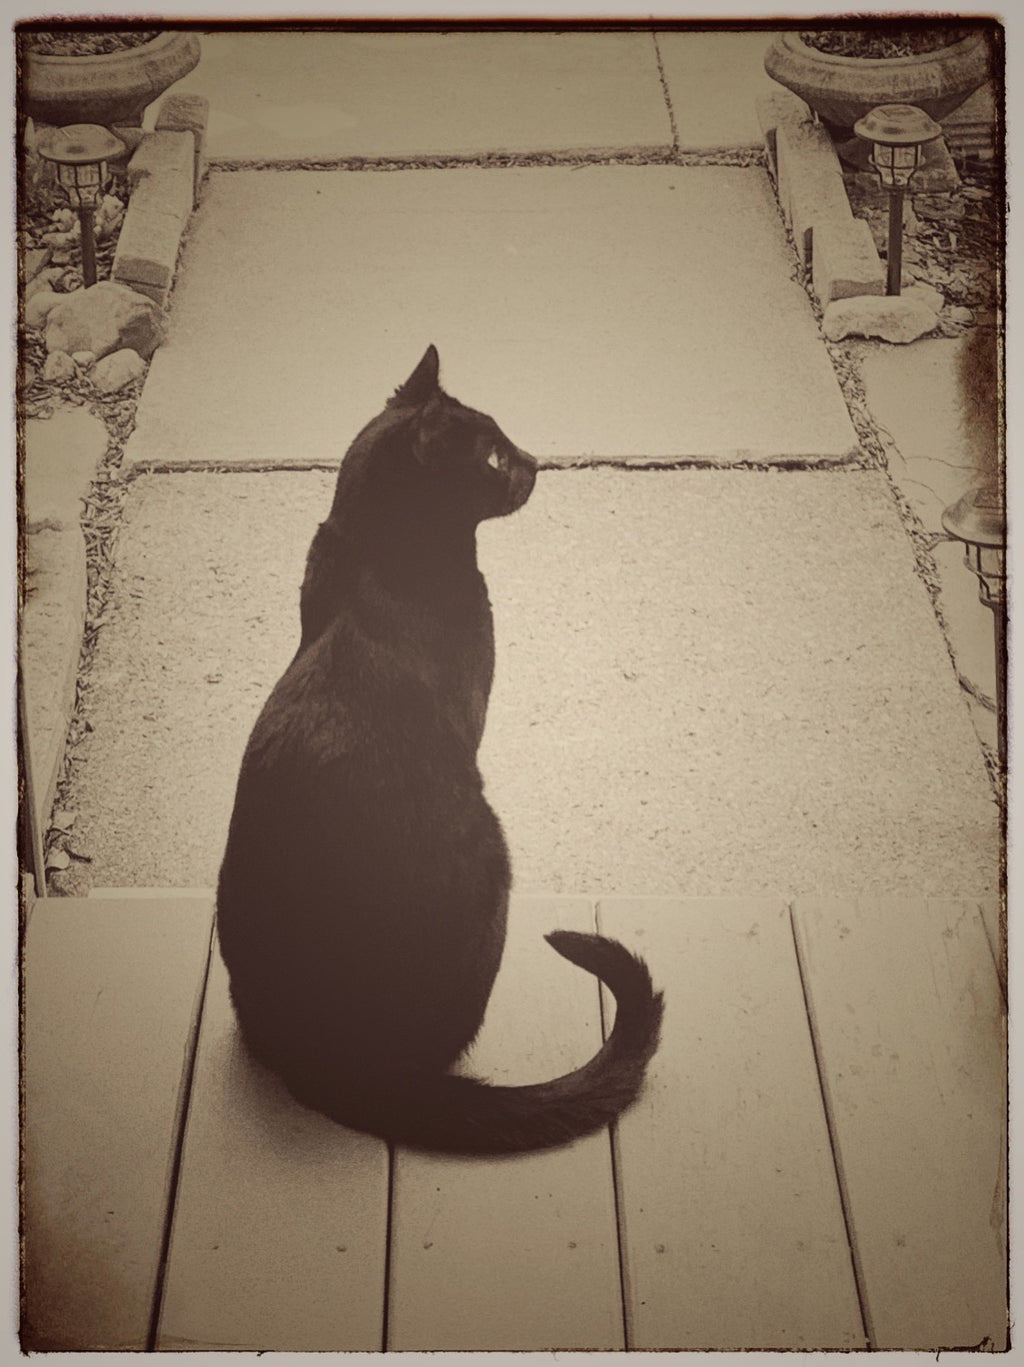 Today we had a beautiful black cat as a visitor on our porch.